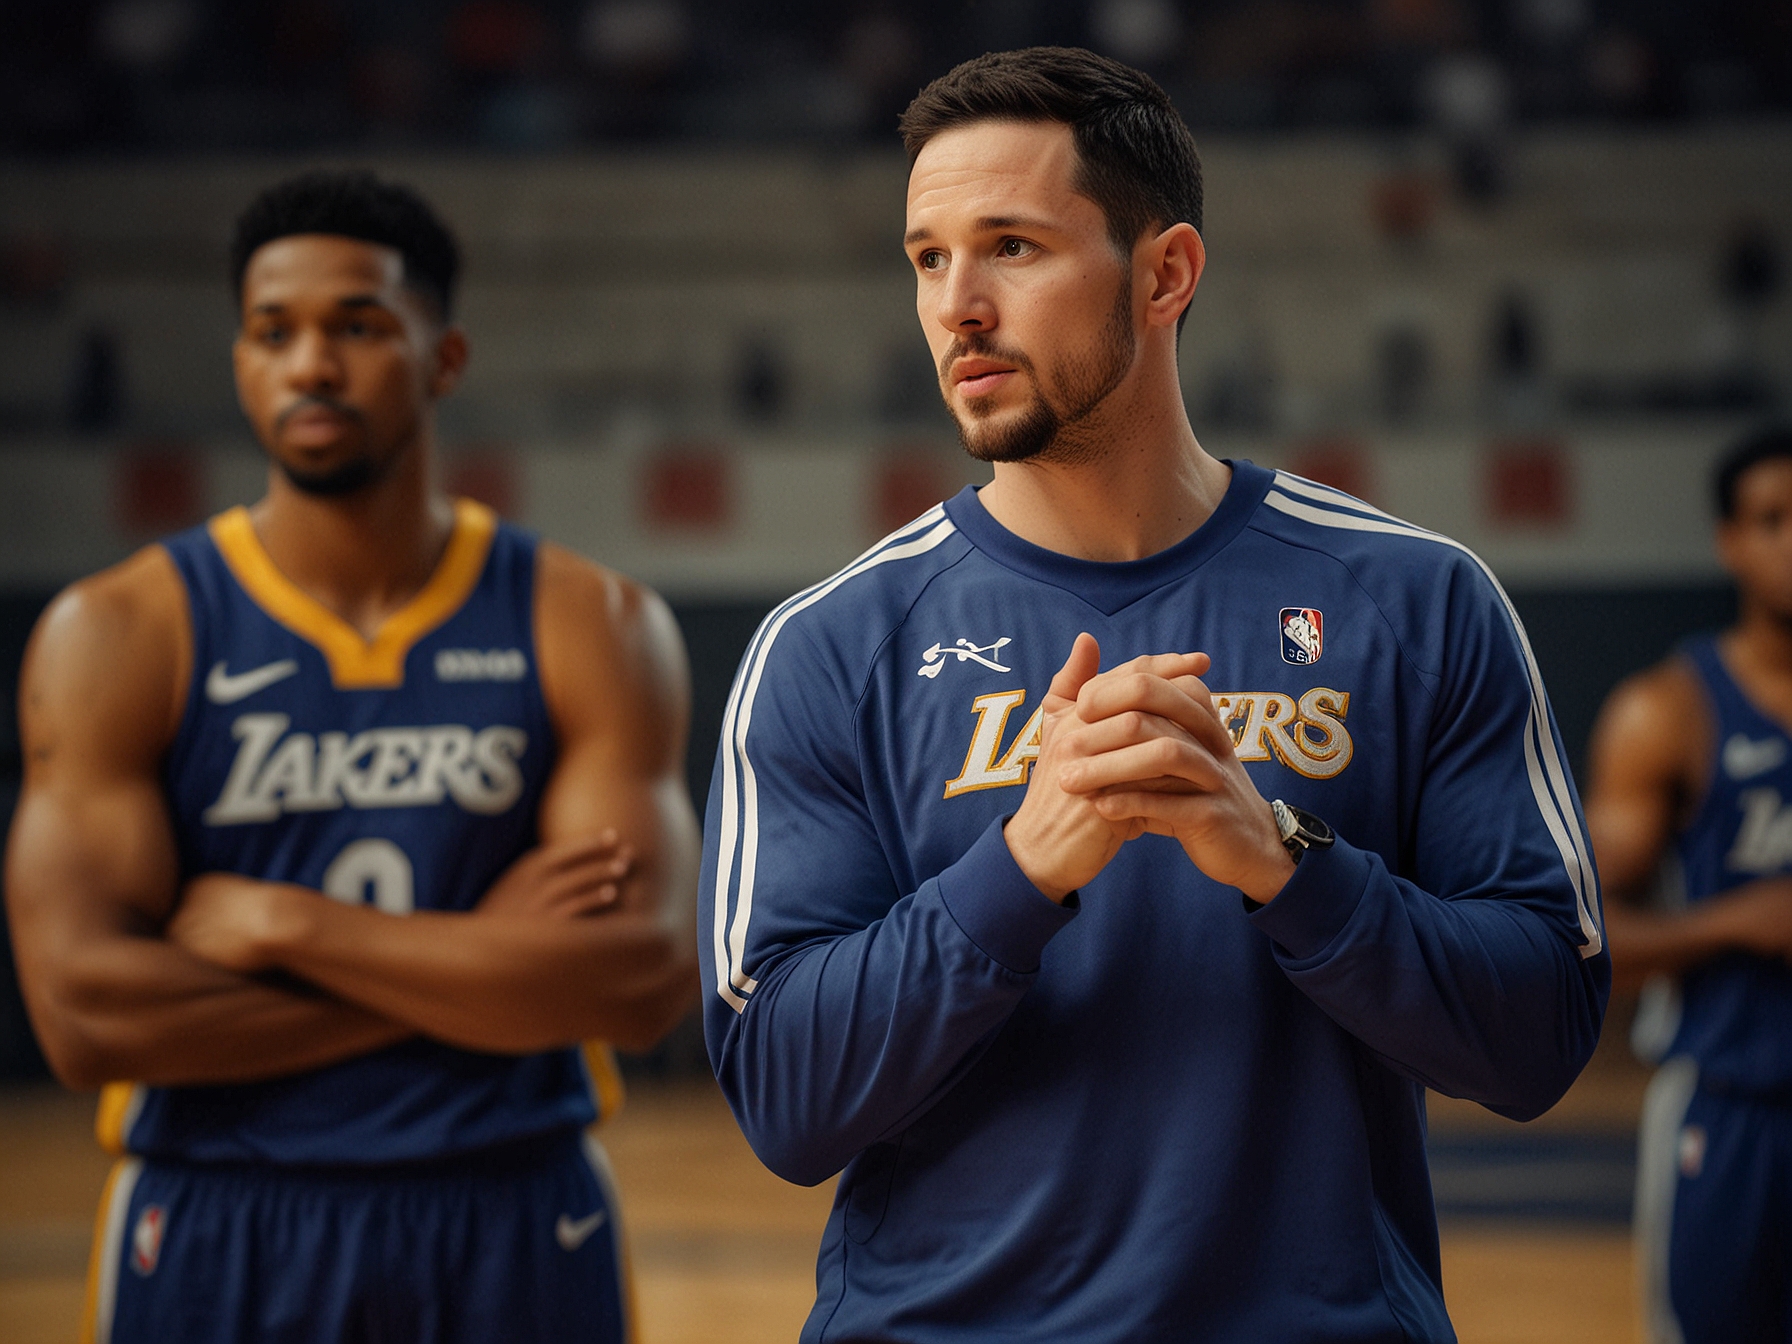 JJ Redick, standing on the sidelines in a Lakers tracksuit, passionately coaching players during his first practice session with the team. His focus and determination are evident.